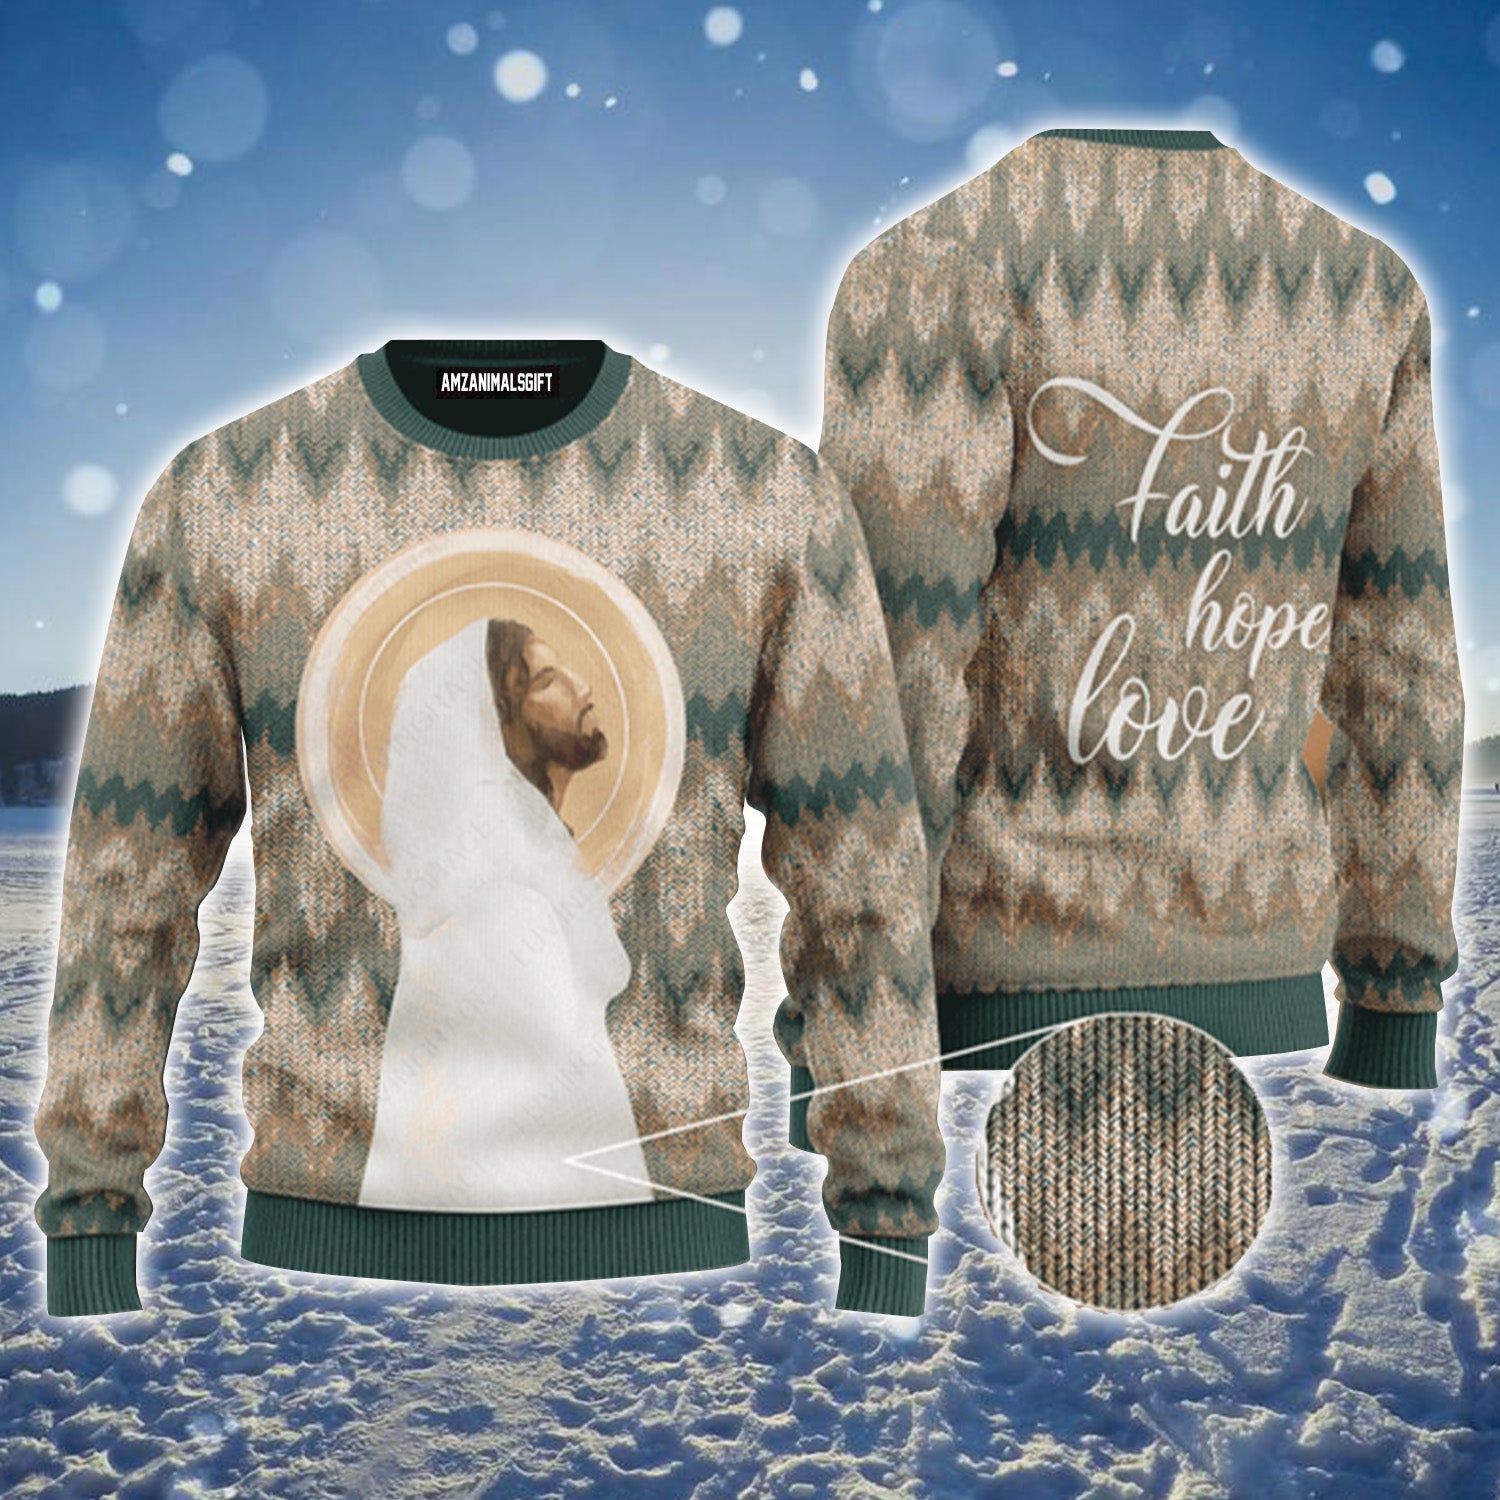 Vintage Christ God Faith Hope Love Urly Sweater, Christmas Sweater For Men & Women - Perfect Gift For Christmas, New Year, Winter